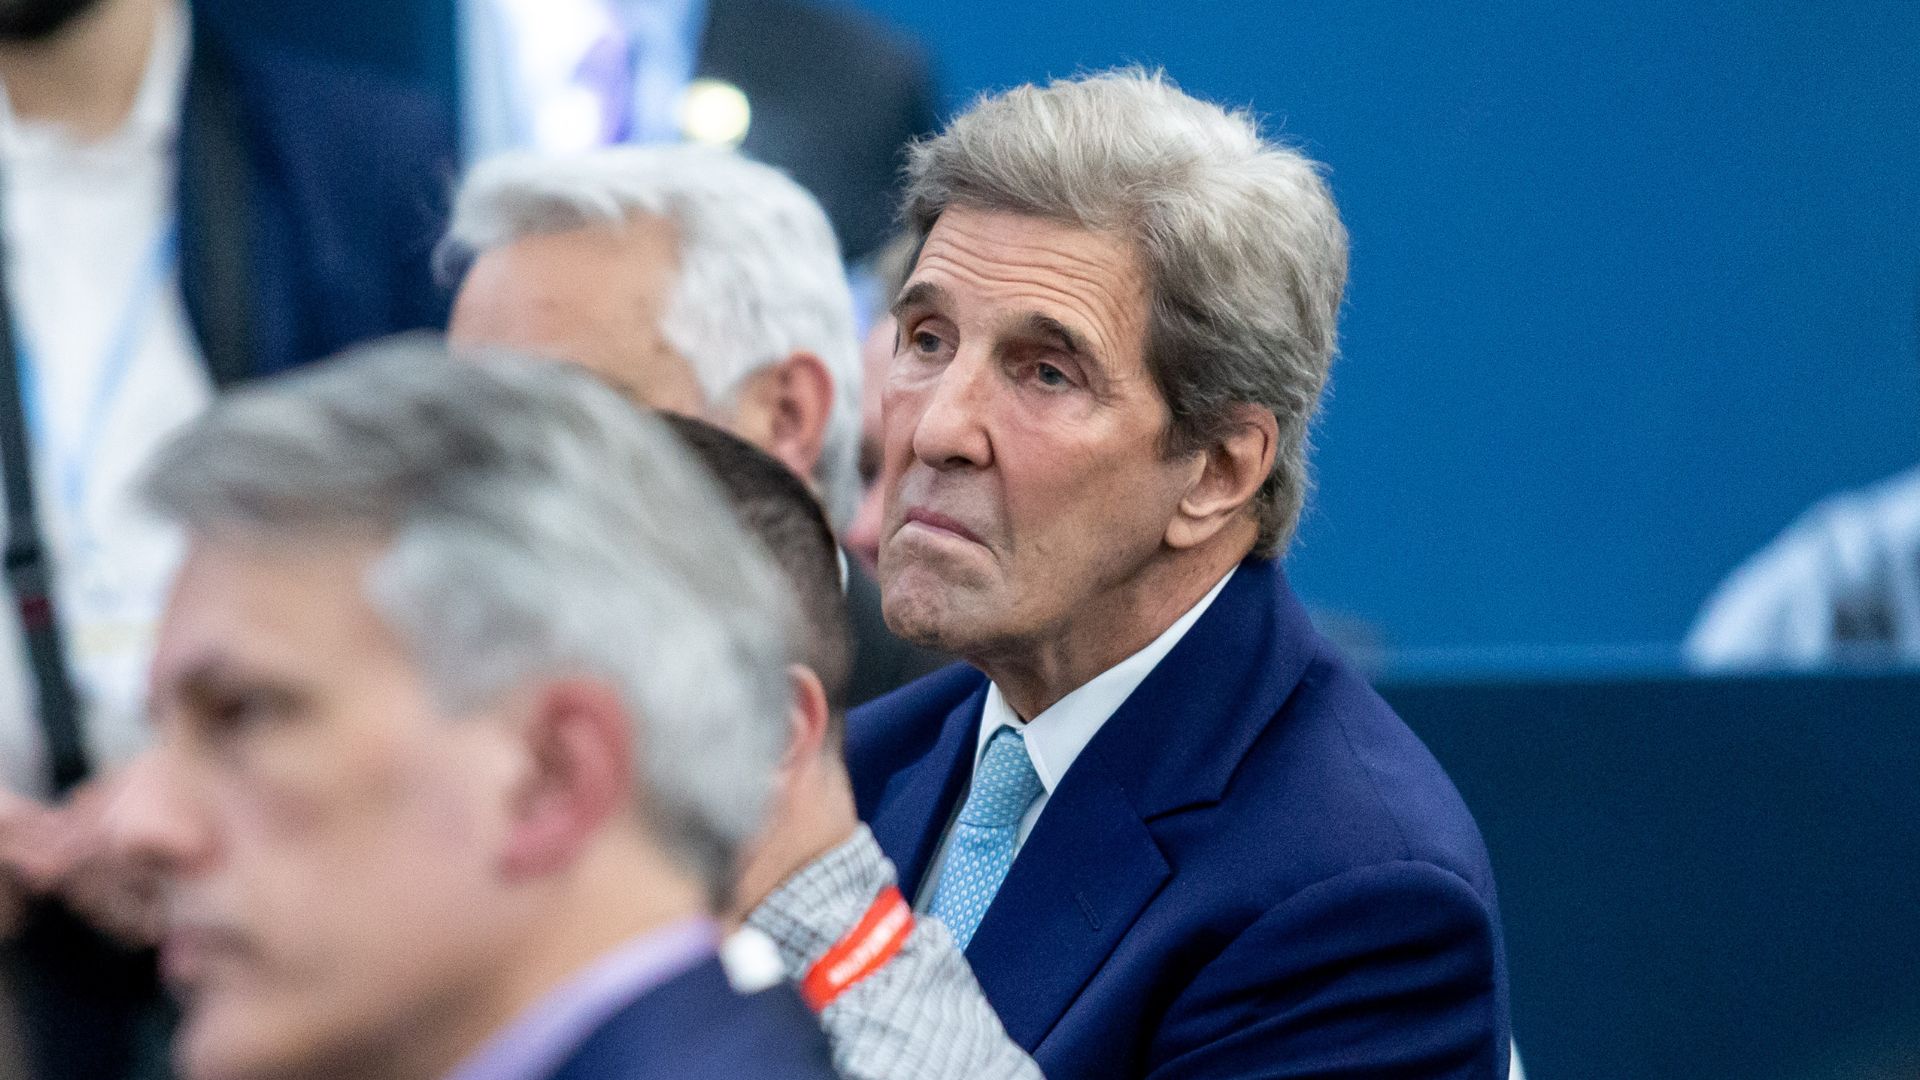 John Kerry Blames Recent COVID Bout For Failed Climate Change Talks With China